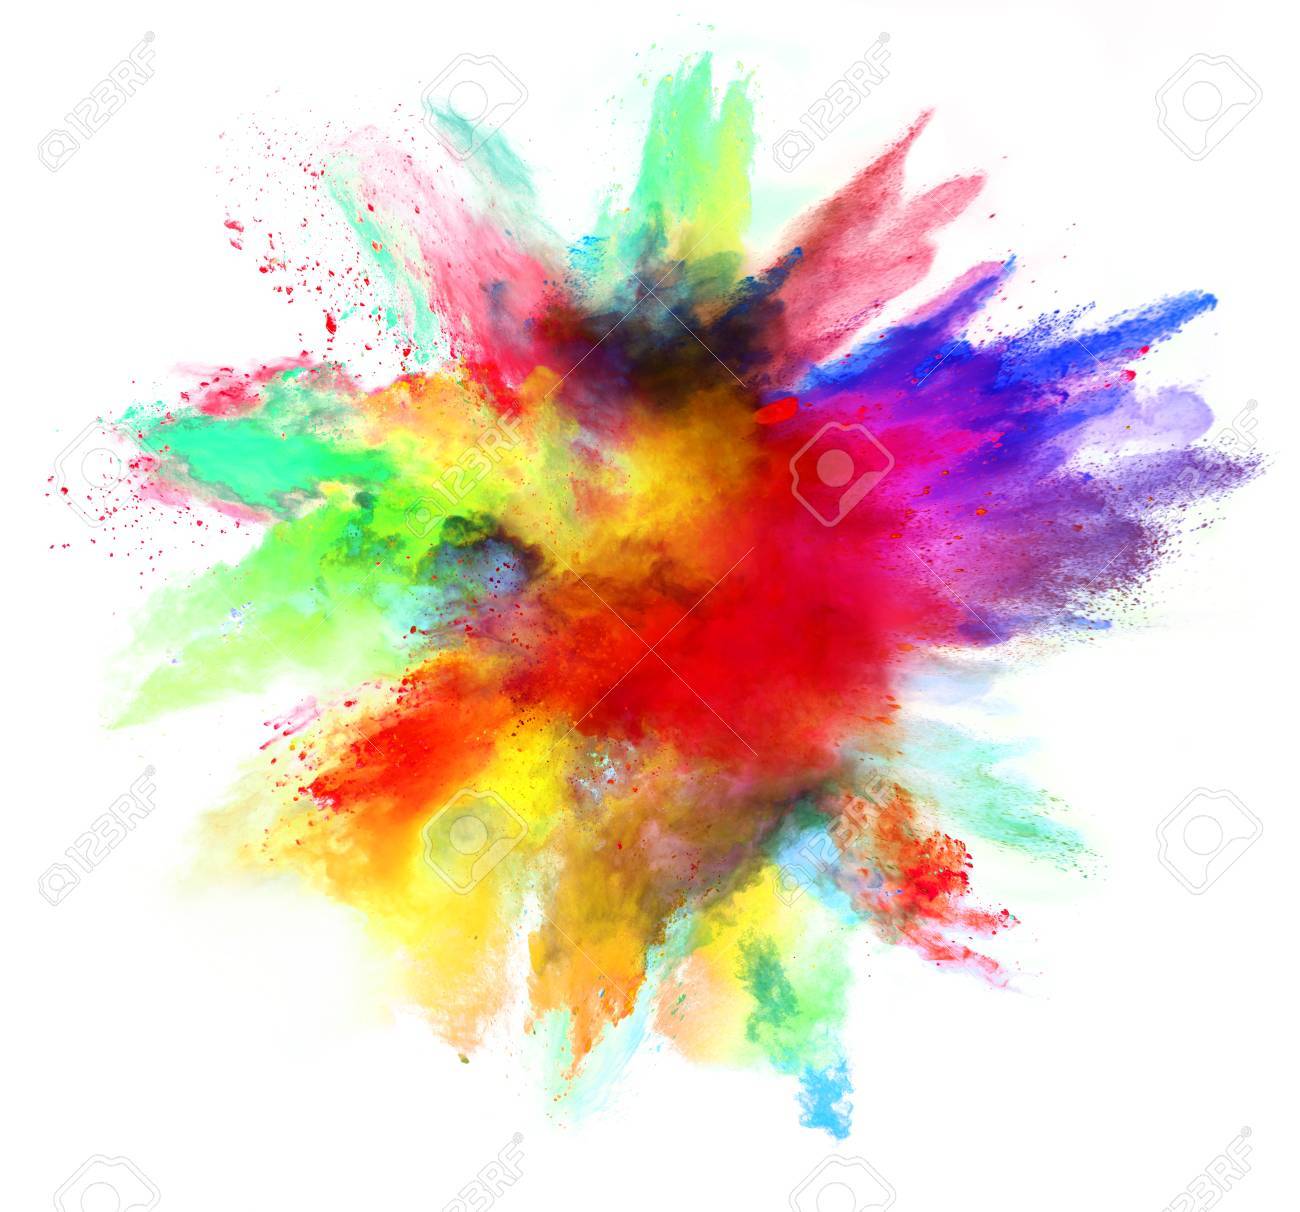 Explosion of colored powder, isolated on white background. Power and art concept, abstract blust of colors.